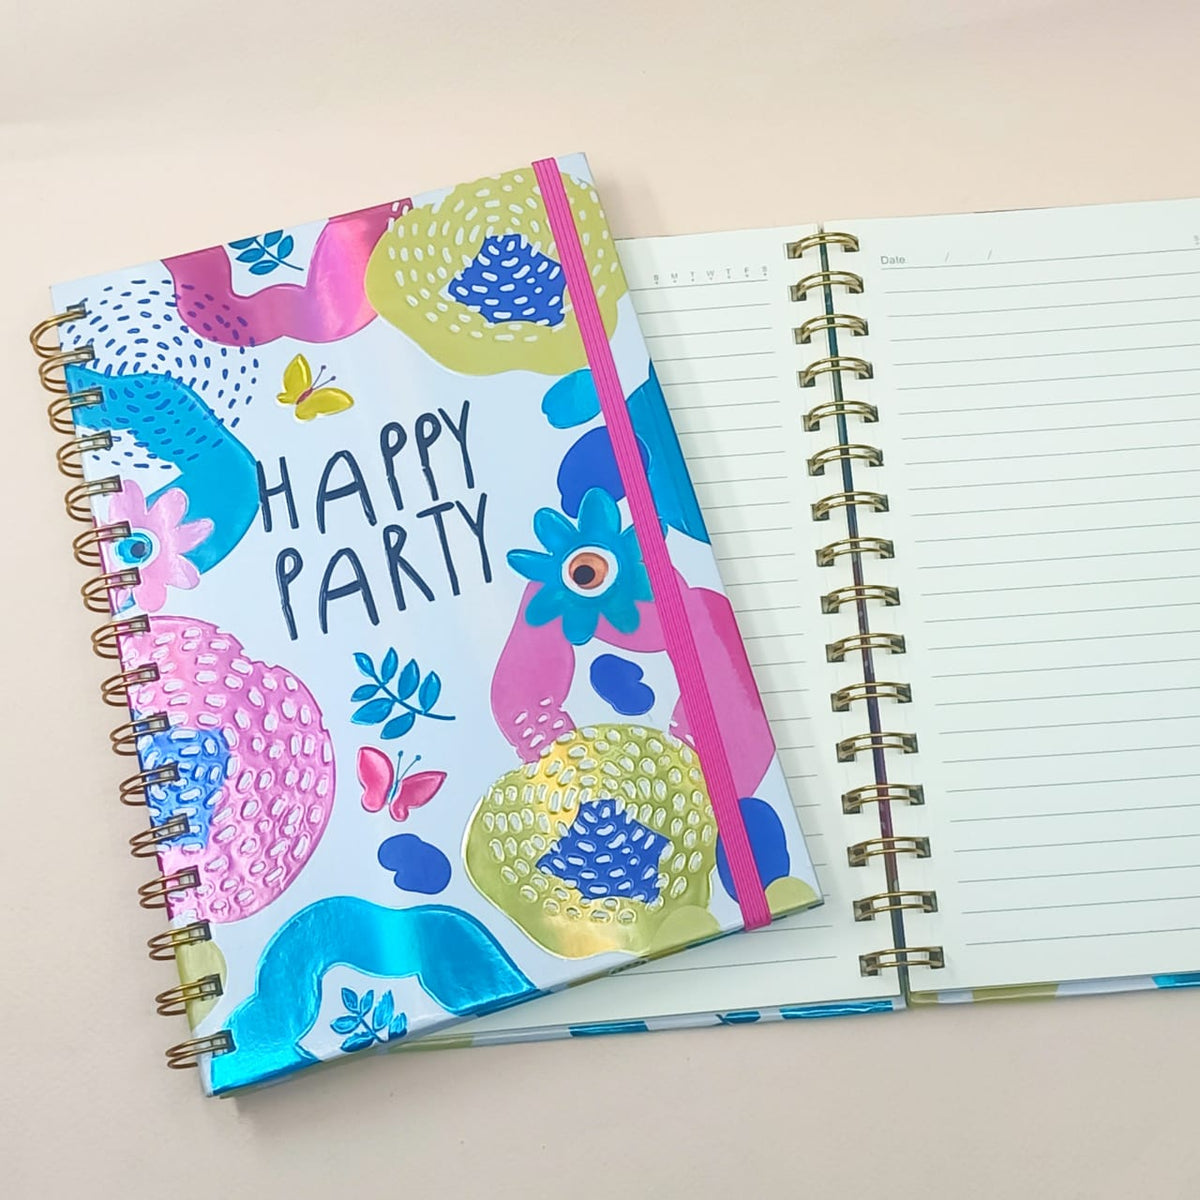 Happy Party Flowers Foiled Spiral - Journal